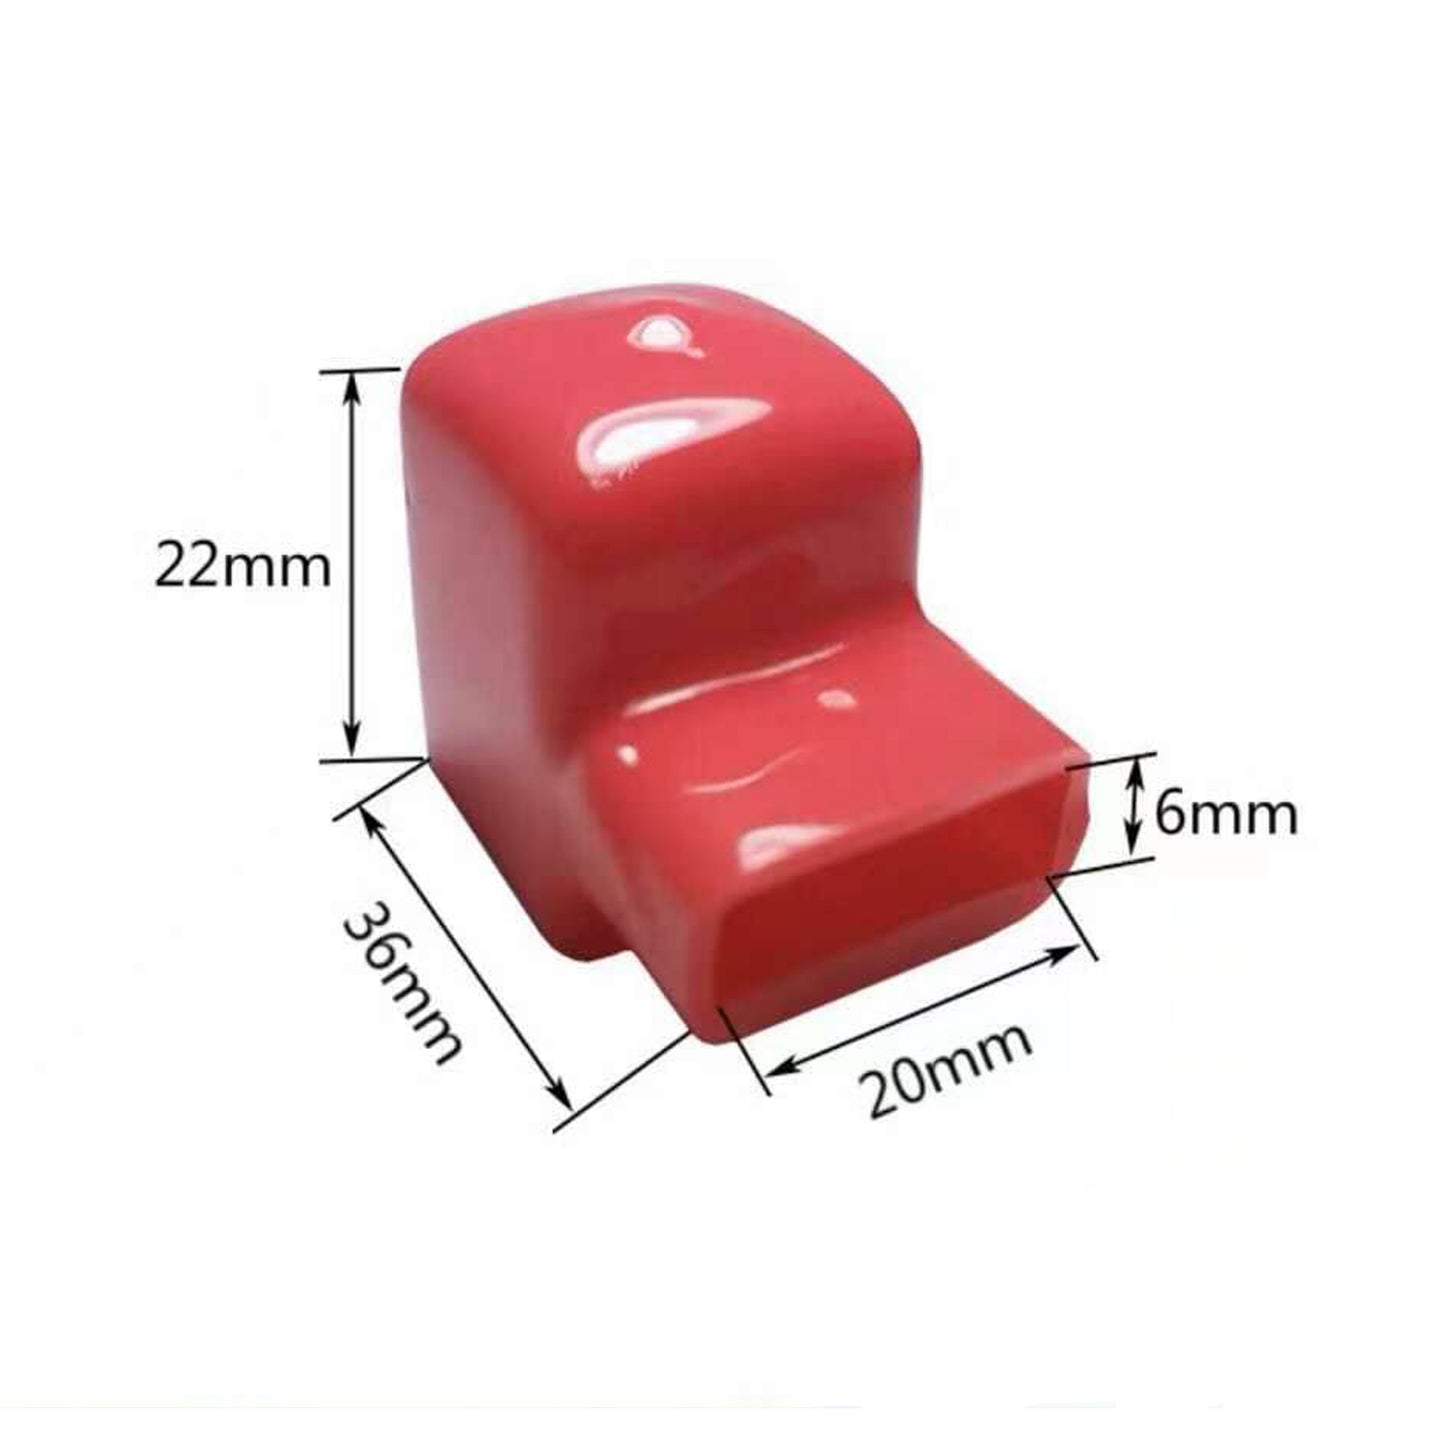 8Pcs Square Red&Black Insulation Terminal Covers Perfect for Lifepo4 Cells